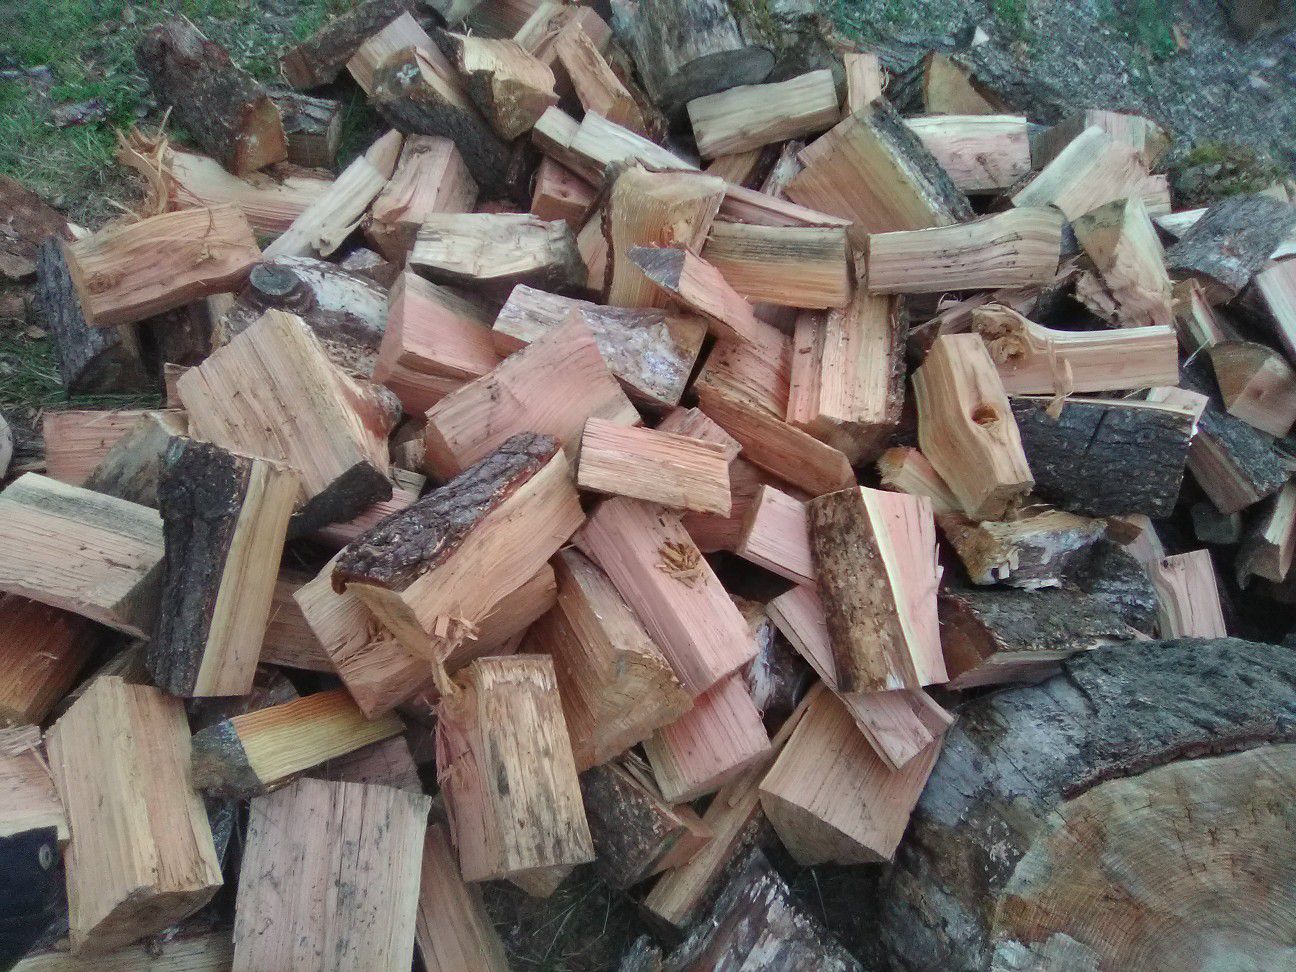 100% DRY, SEASONED FIREWOOD MIX FOR SALE!